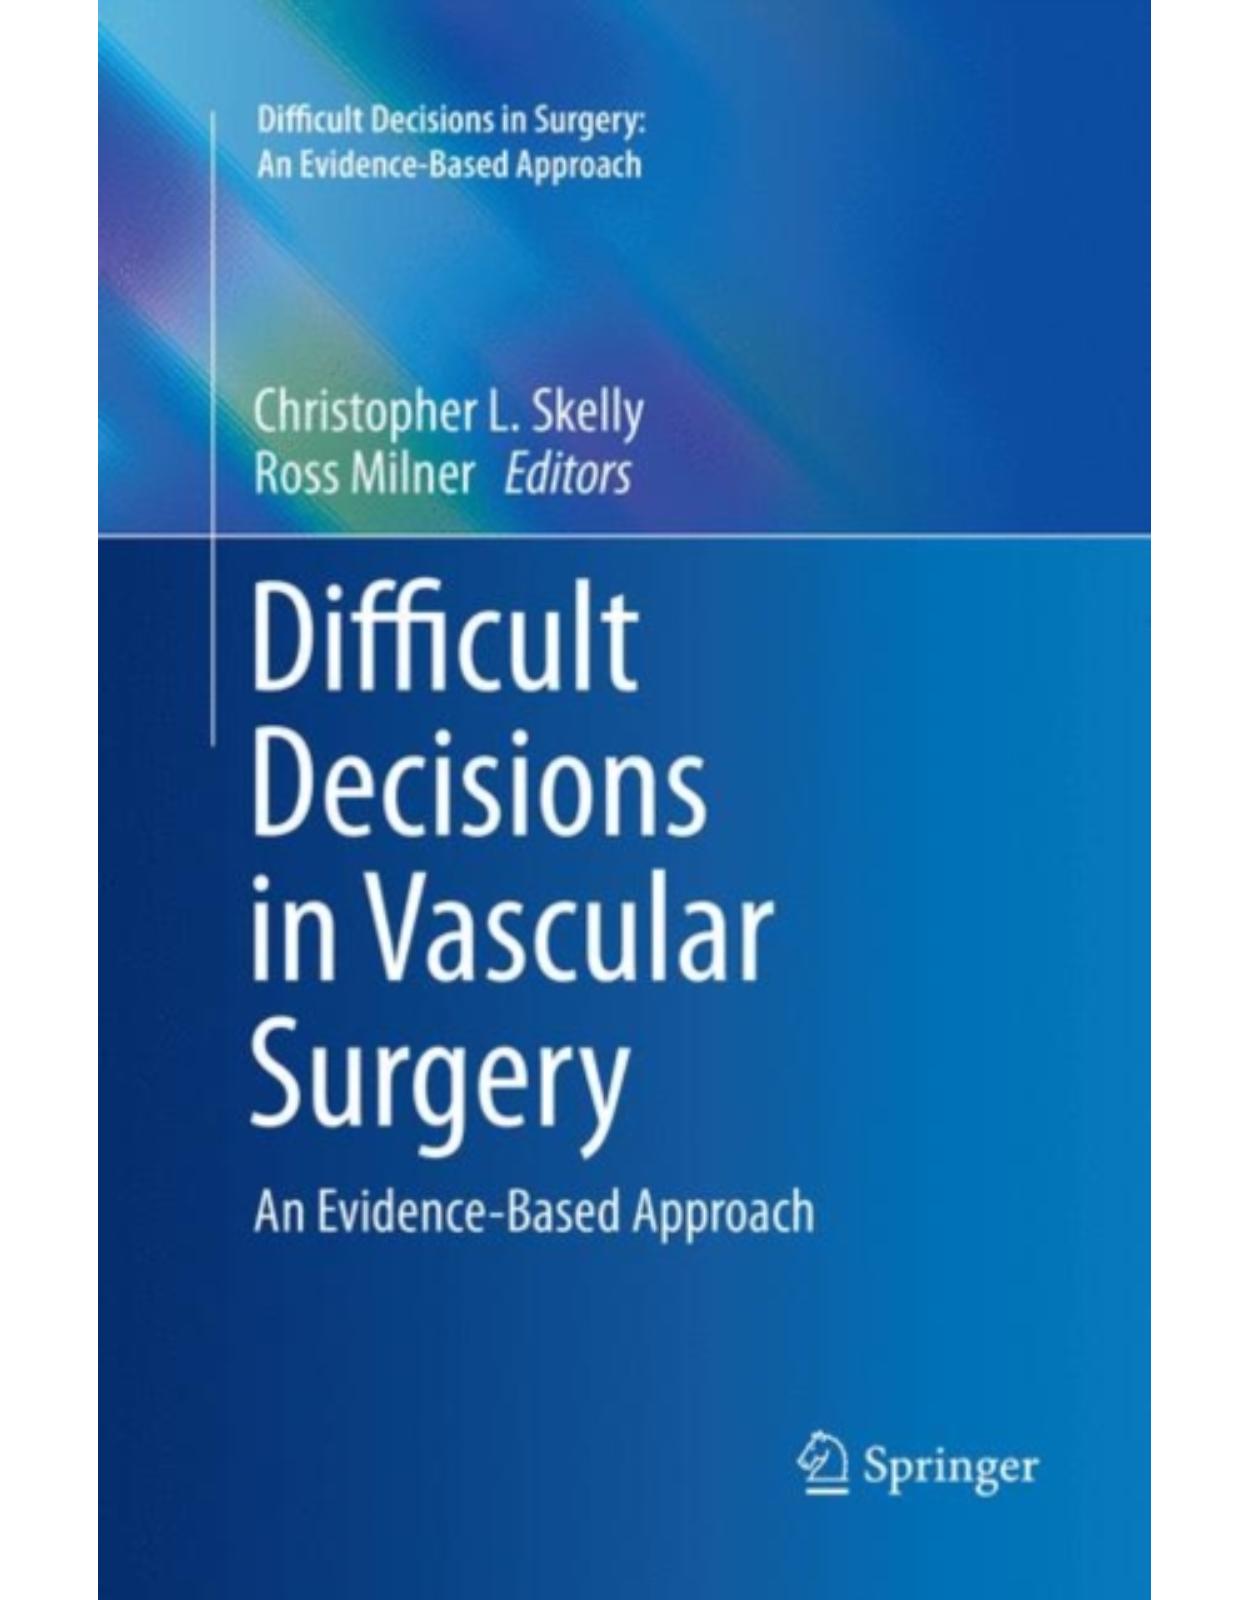 Difficult Decisions in Vascular Surgery: An Evidence-Based Approach